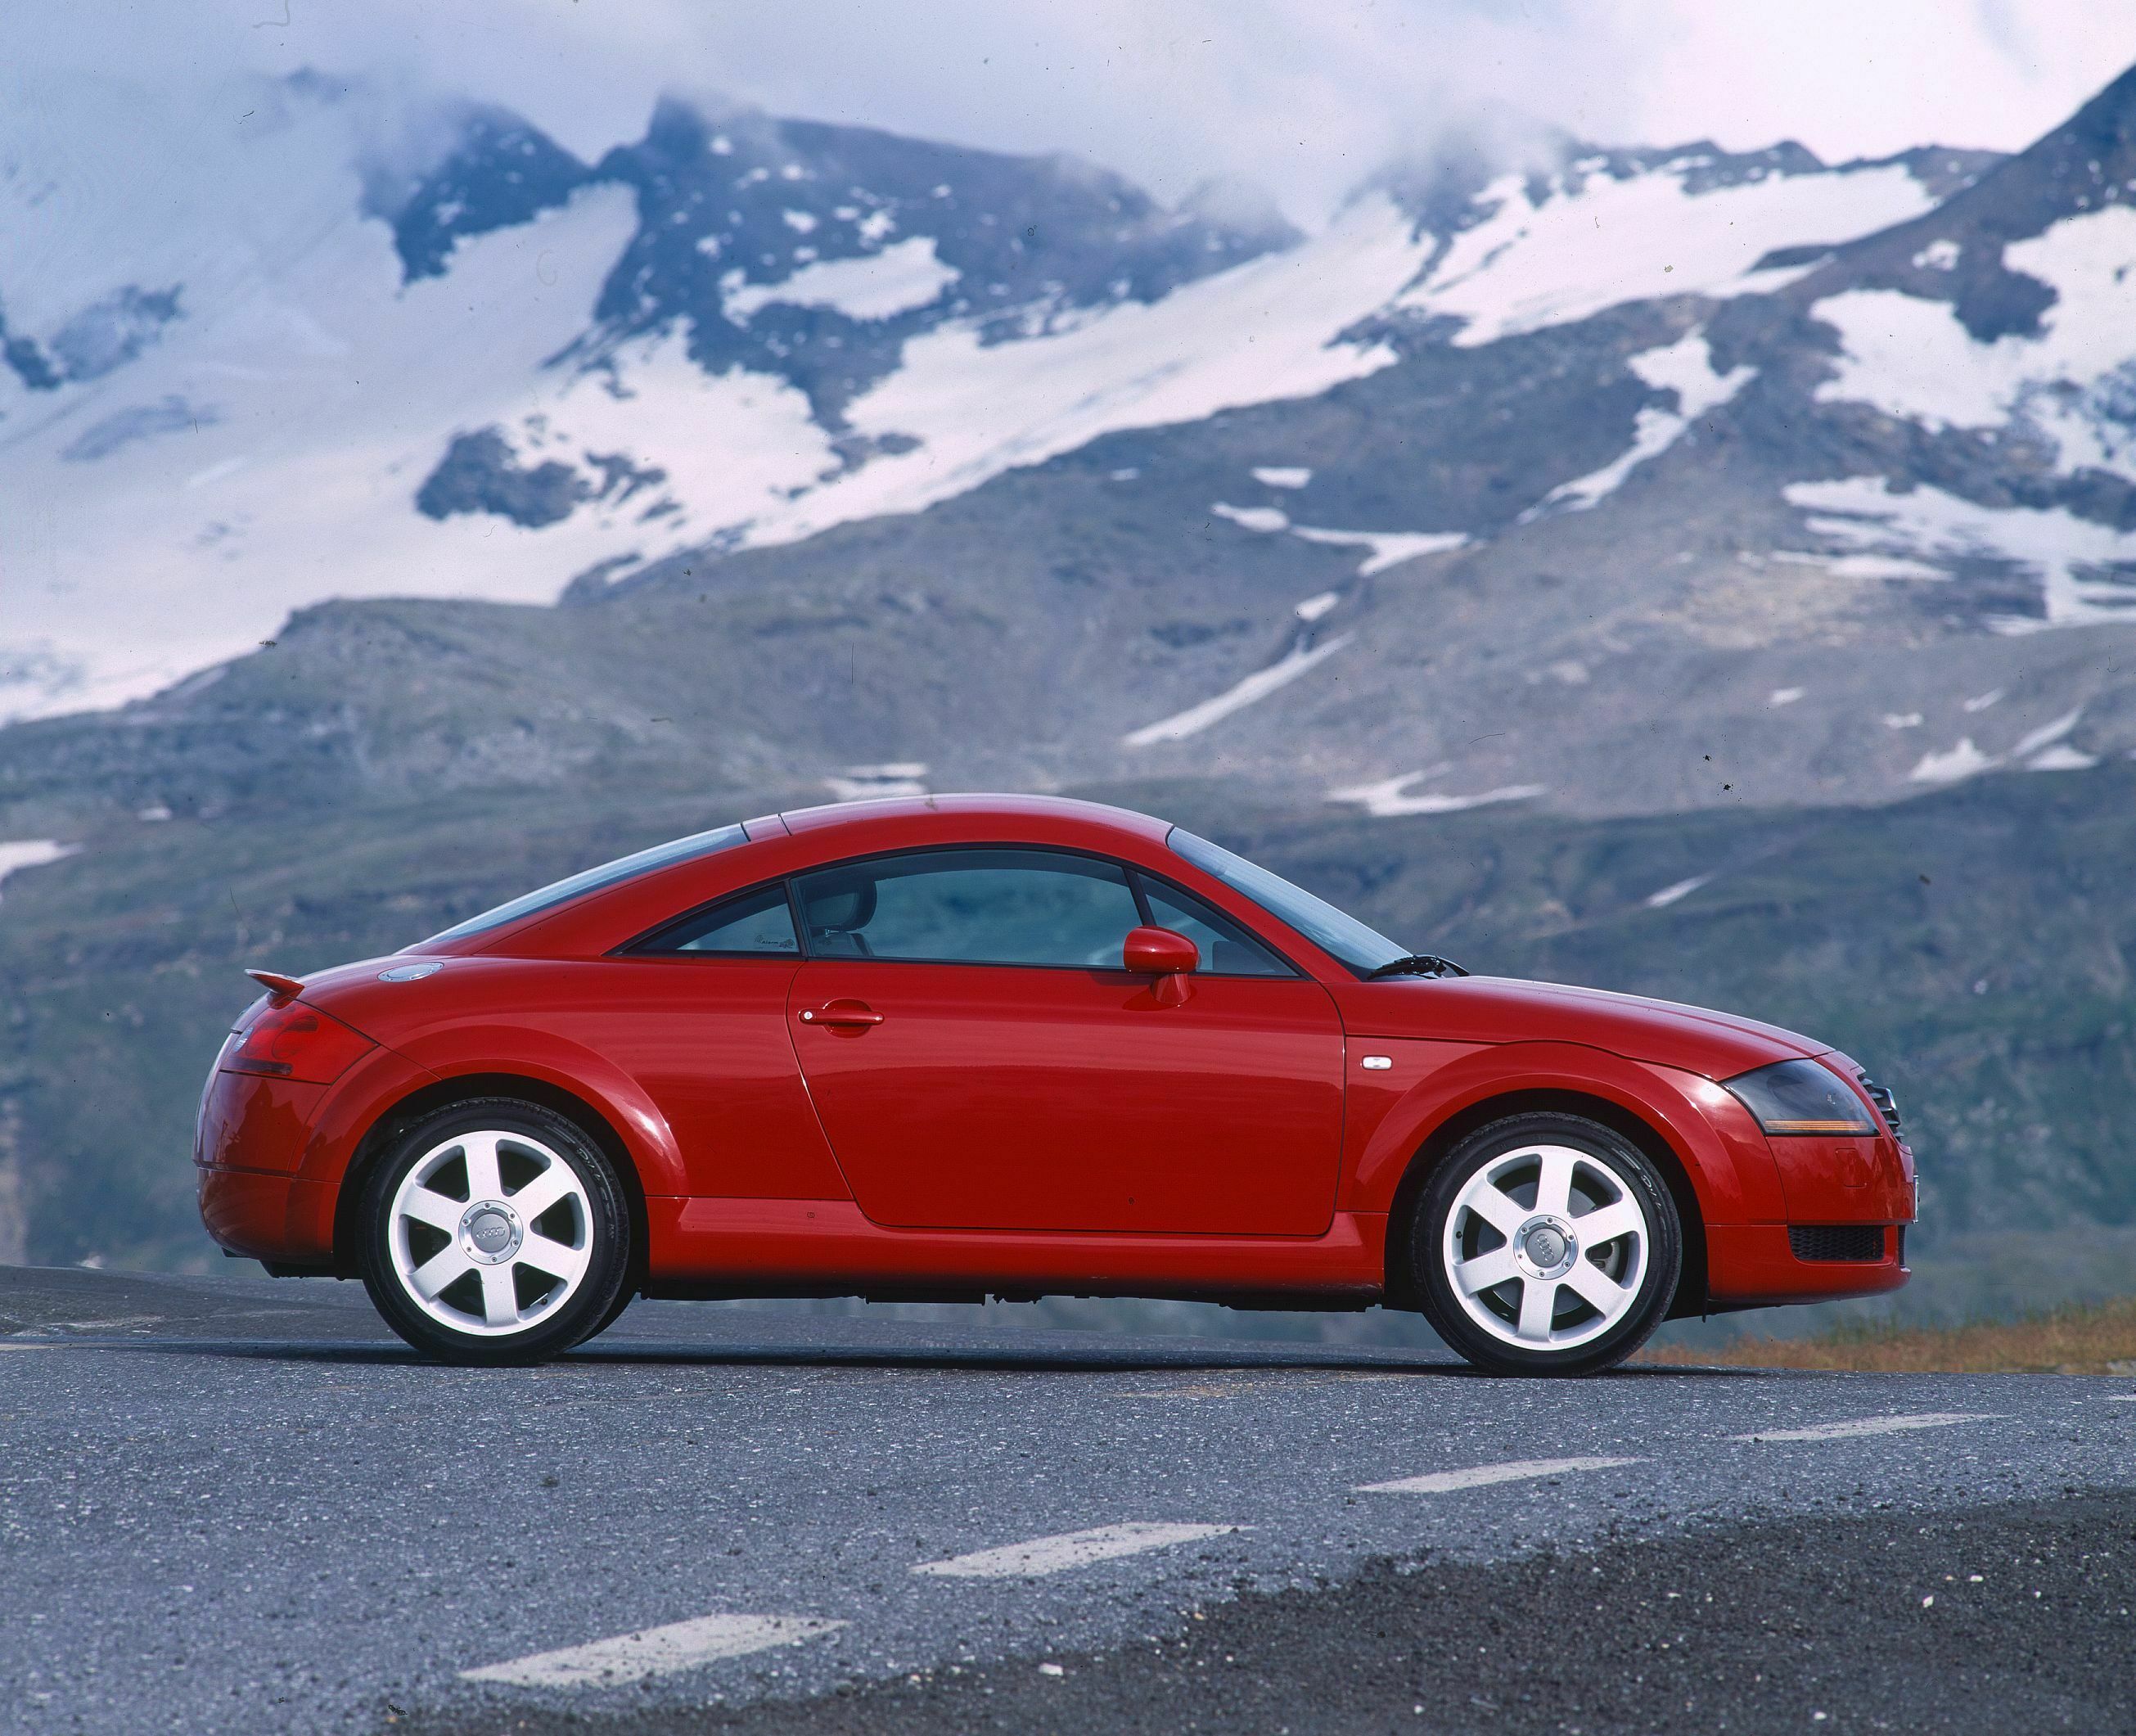 580-Mile Audi TT Reminds Us Why Everyone Fell For The Bauhaus Original